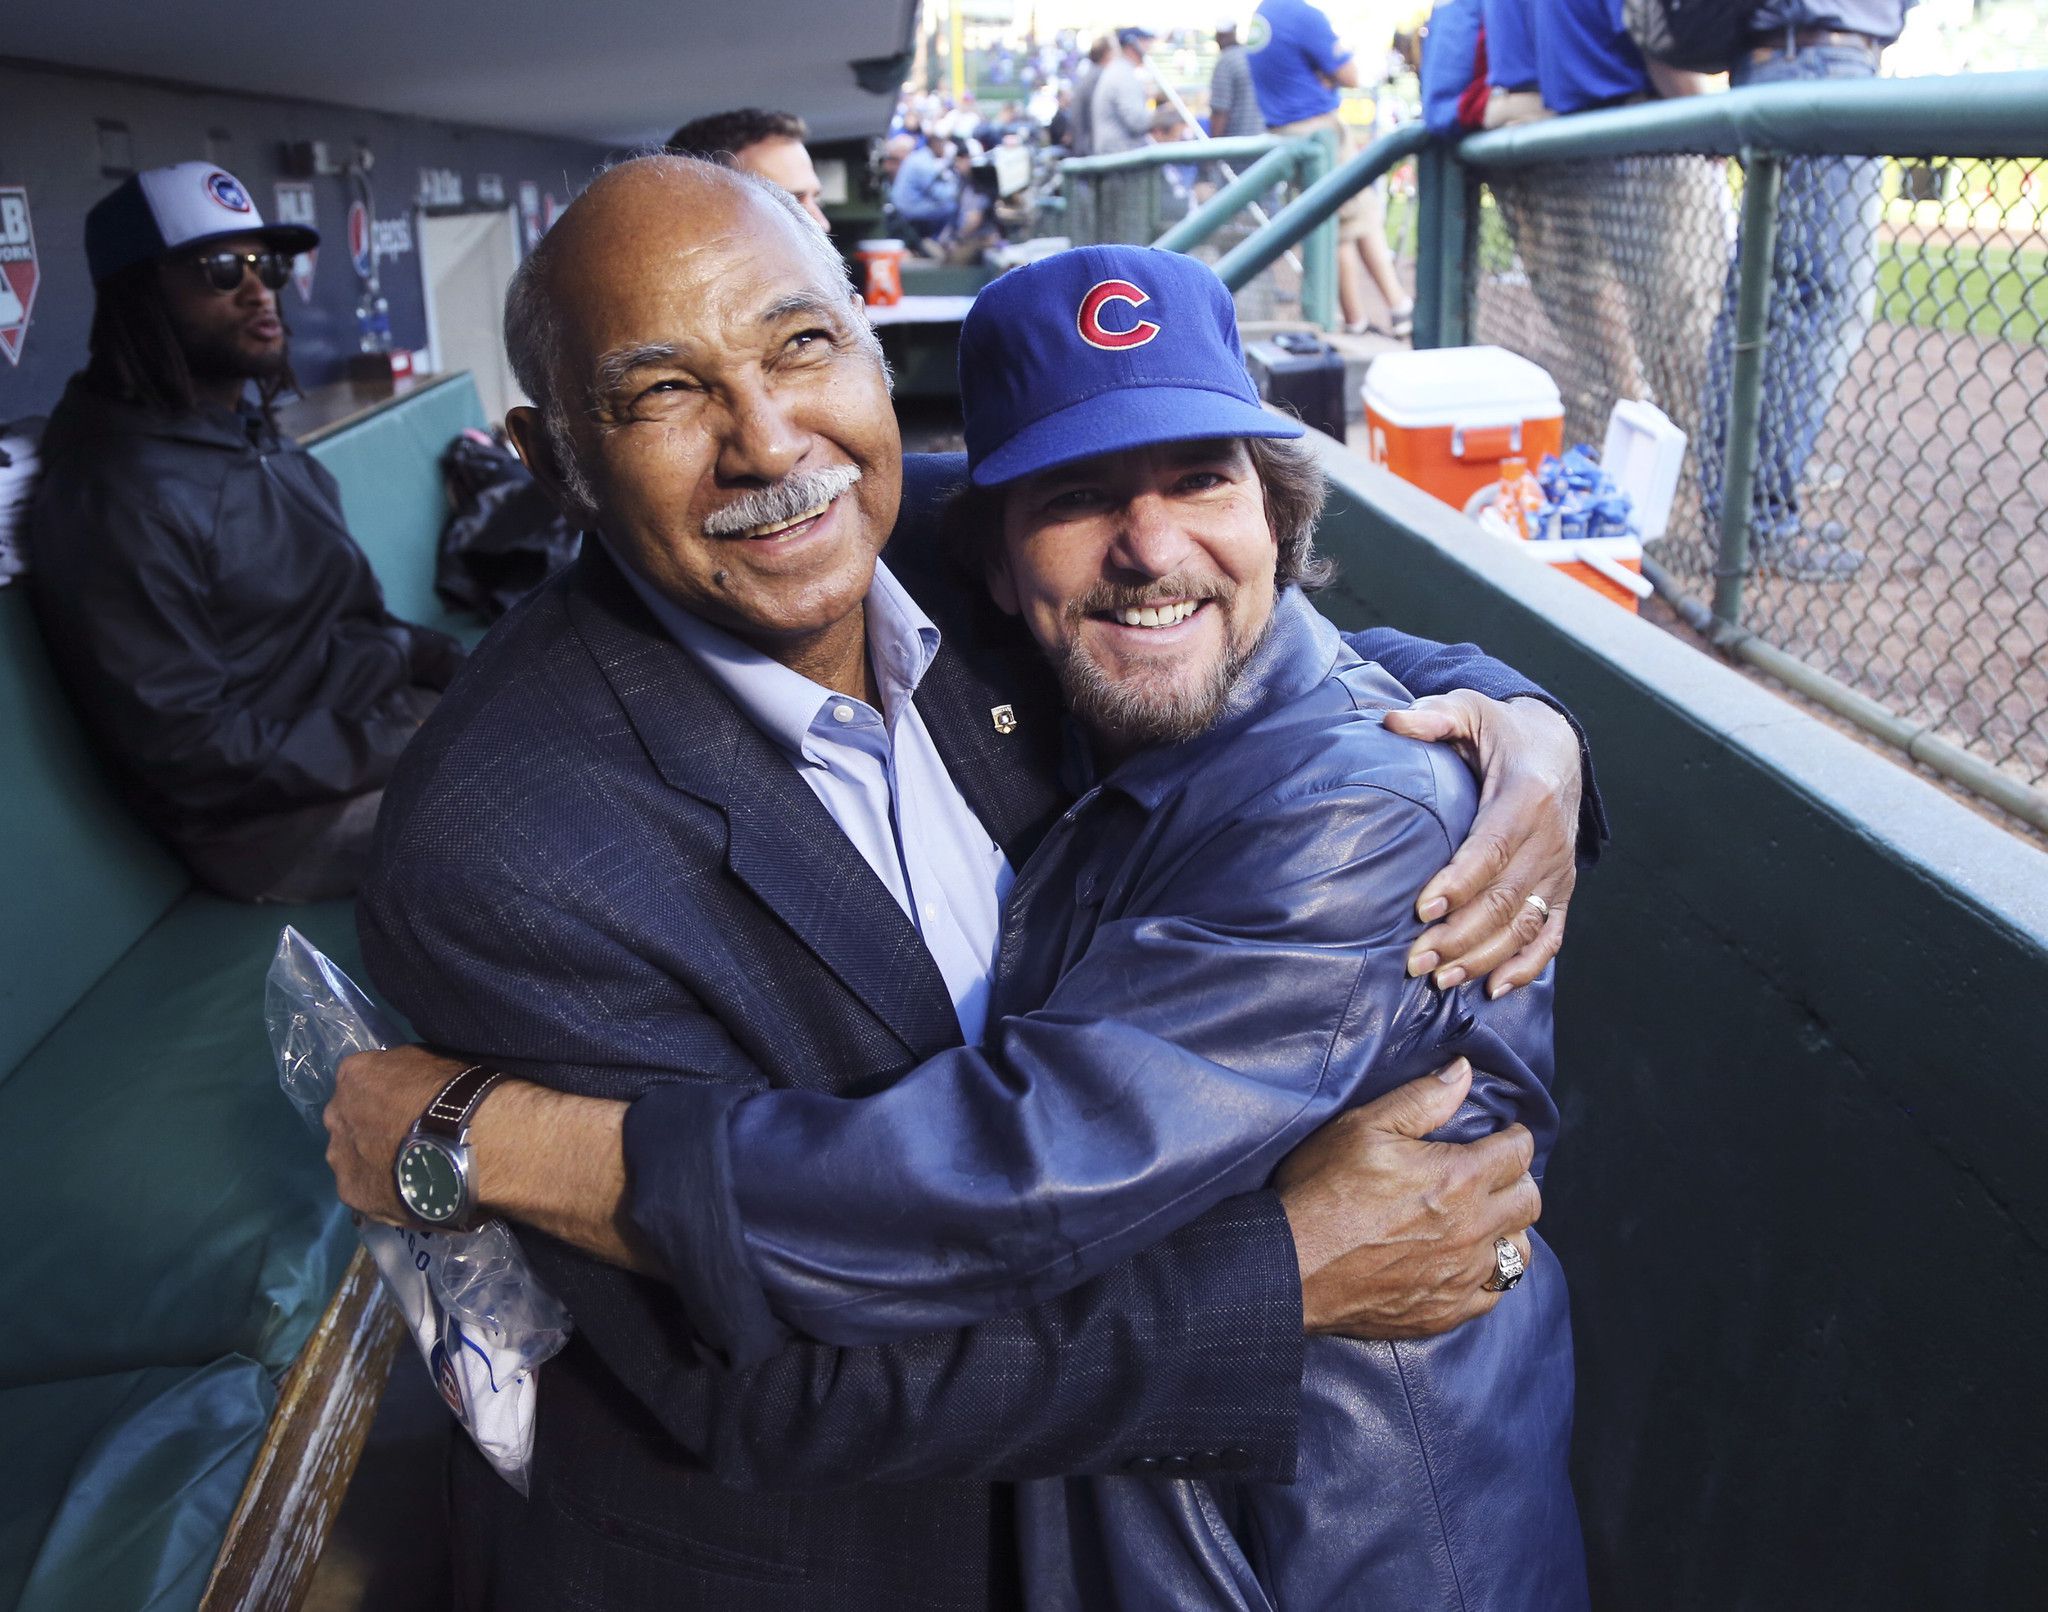 CUBS Go All The Way By Eddie Vedder : Winning the World Series in Game 7  